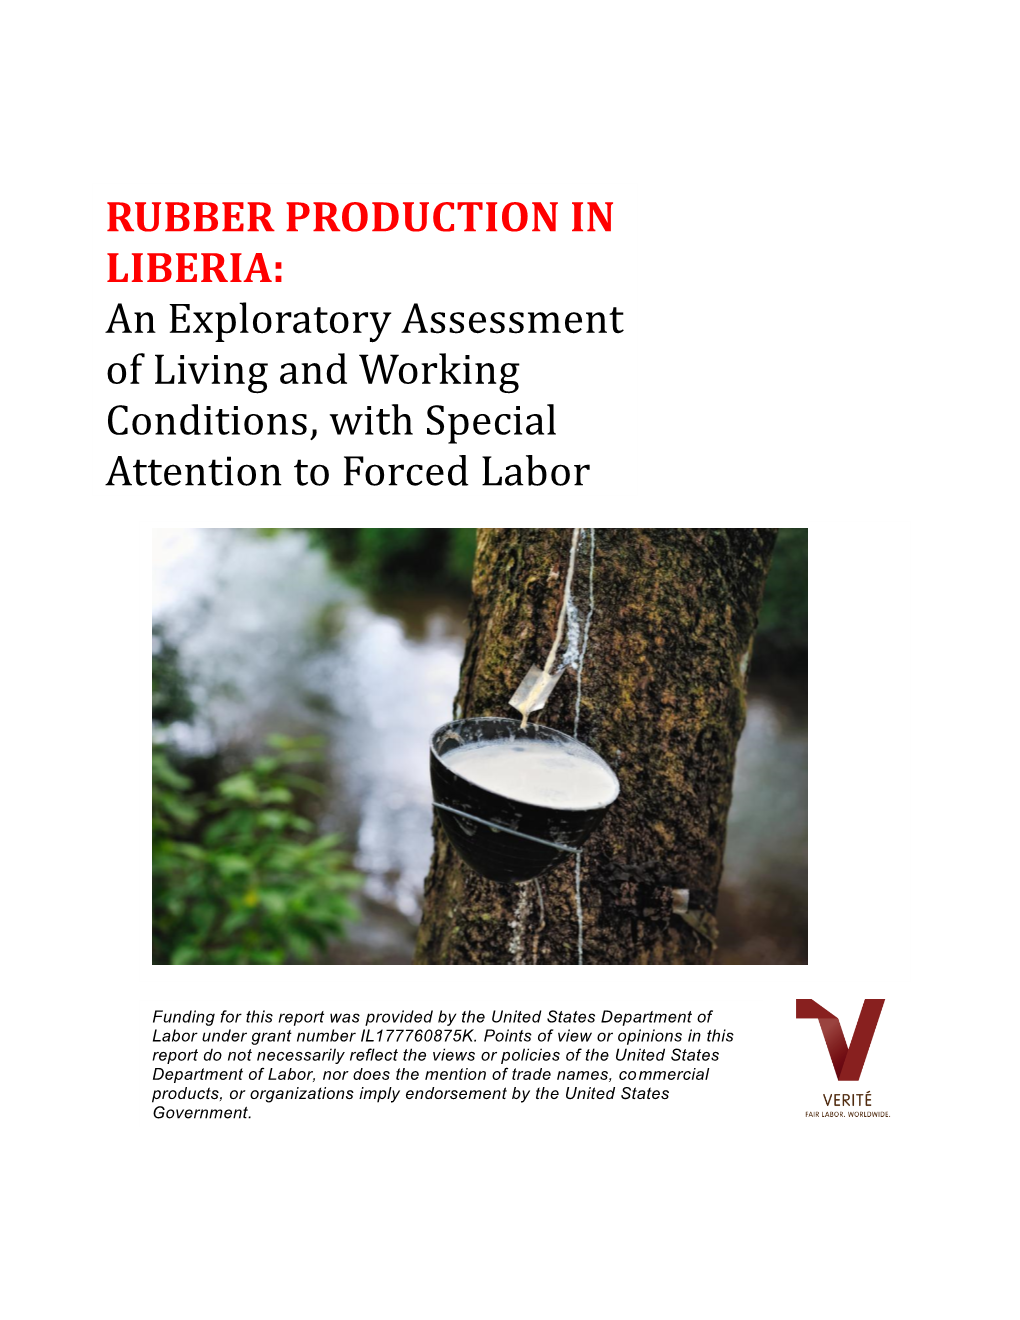 Rubber Production in Liberia: an Exploratory Assessment of Living and Working Conditions, with Special Attention to Forced Labor 2 Abbreviations